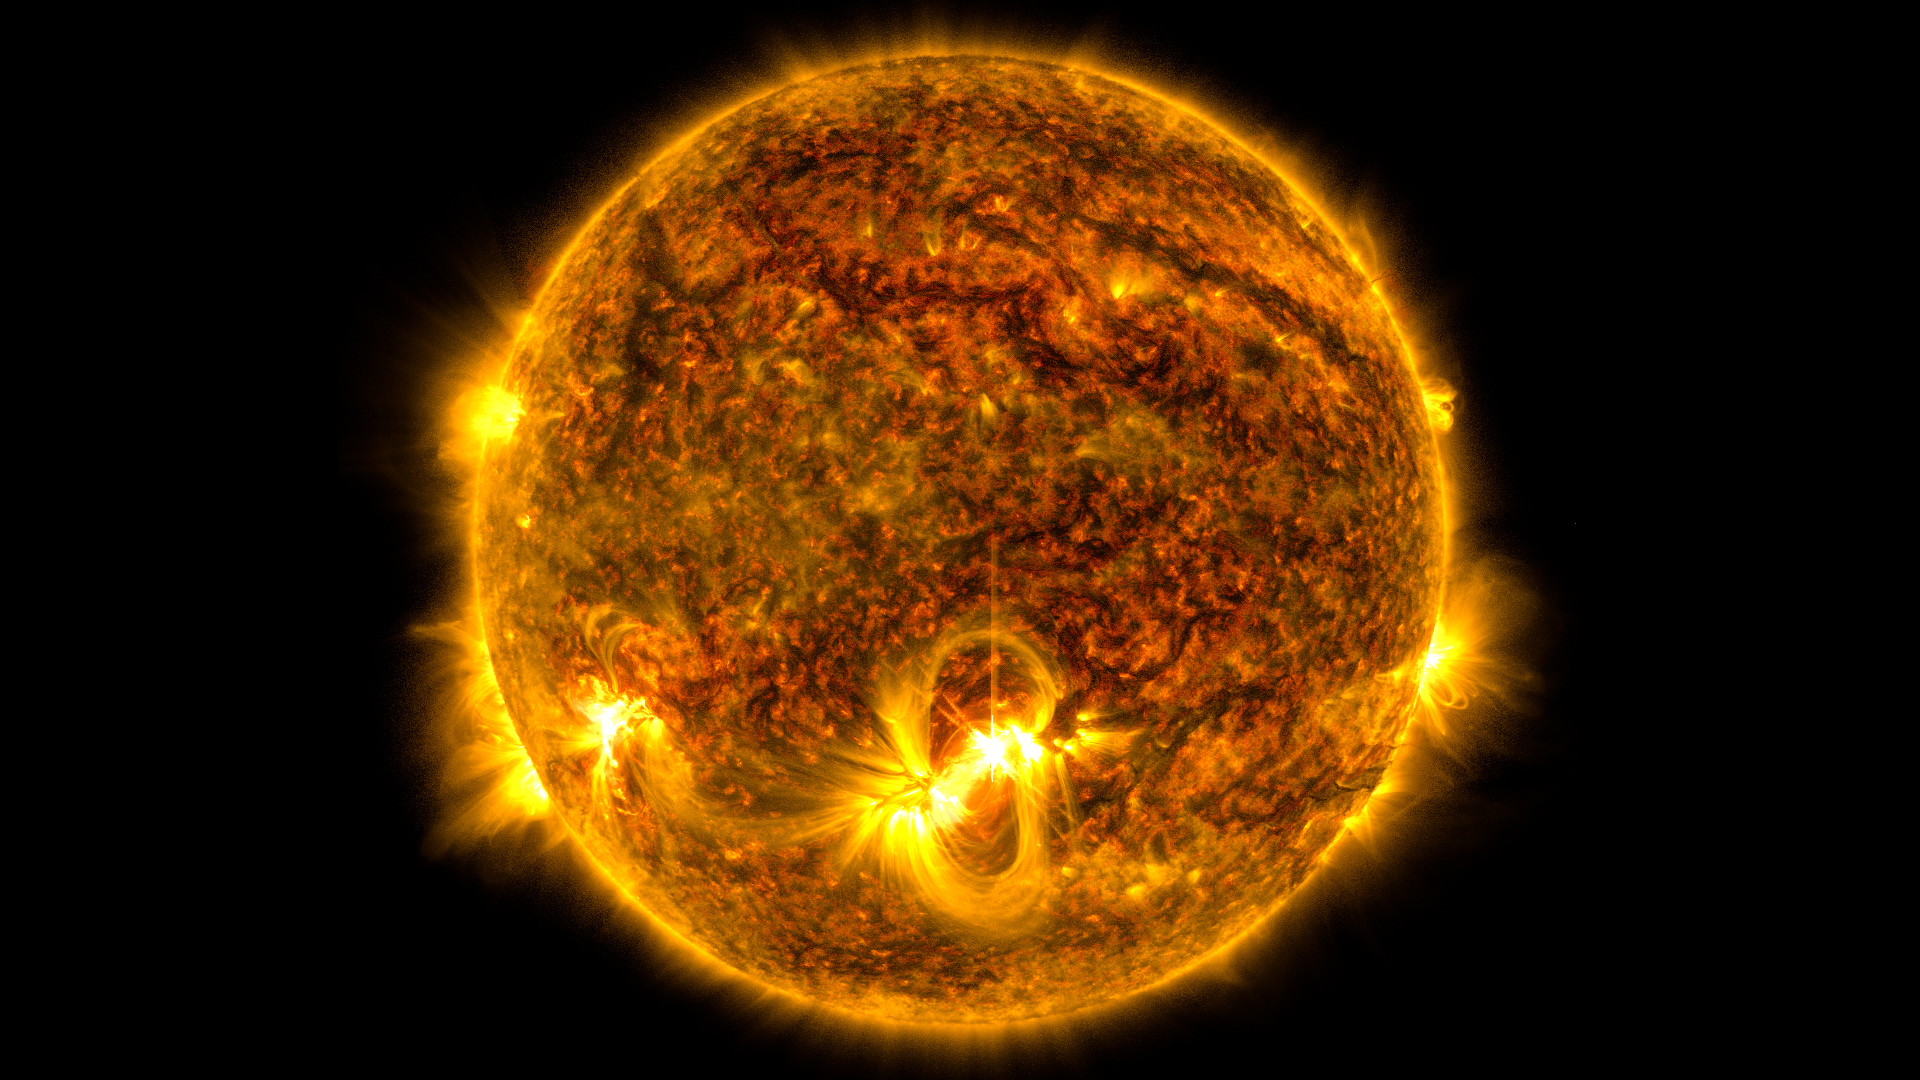 Short video of the X1.5 flare emitted by the Sun on May 10, 2022 and captured by the Solar Dynamics Observatory in three wavelengths of extreme ultraviolet light that highlight different temperatures and features of the Sun's atmosphere, the corona.Credit: NASA/GSFC/SDOMusic: "Examples" from Universal Production MusicComplete transcript available.